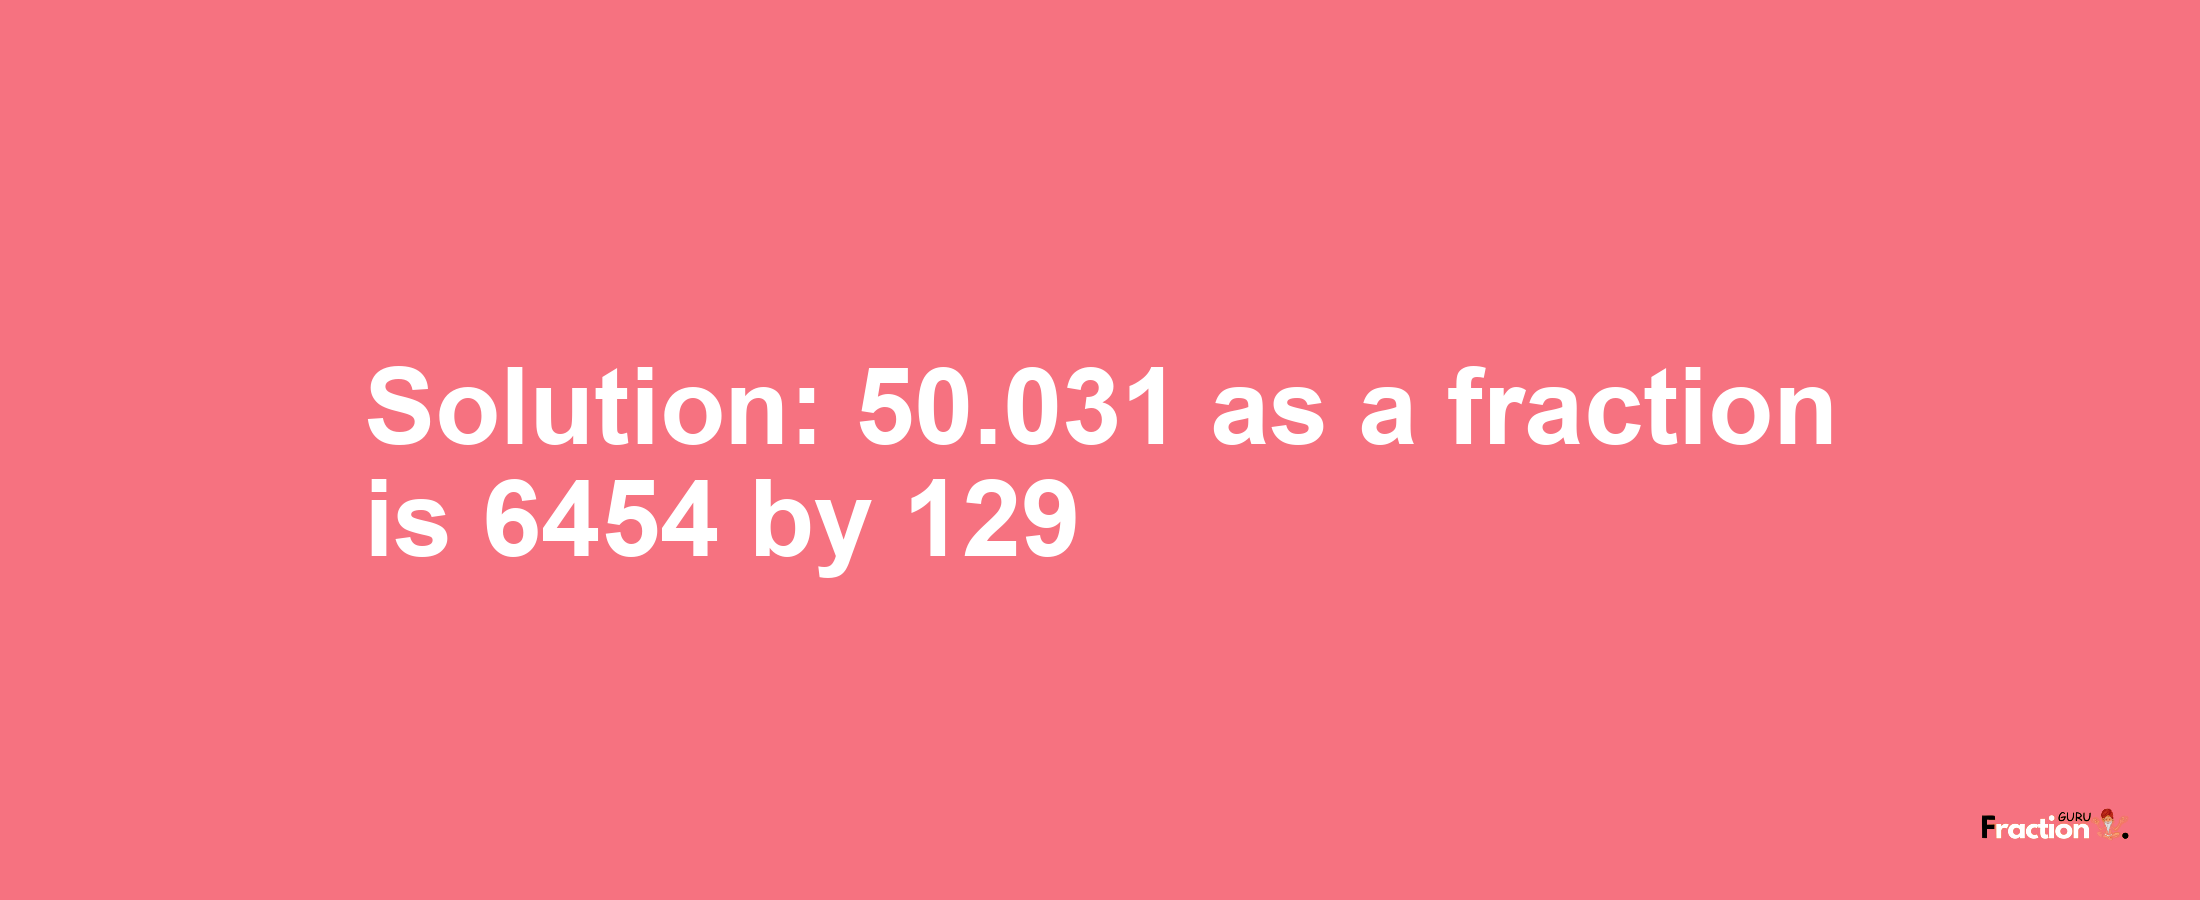 Solution:50.031 as a fraction is 6454/129